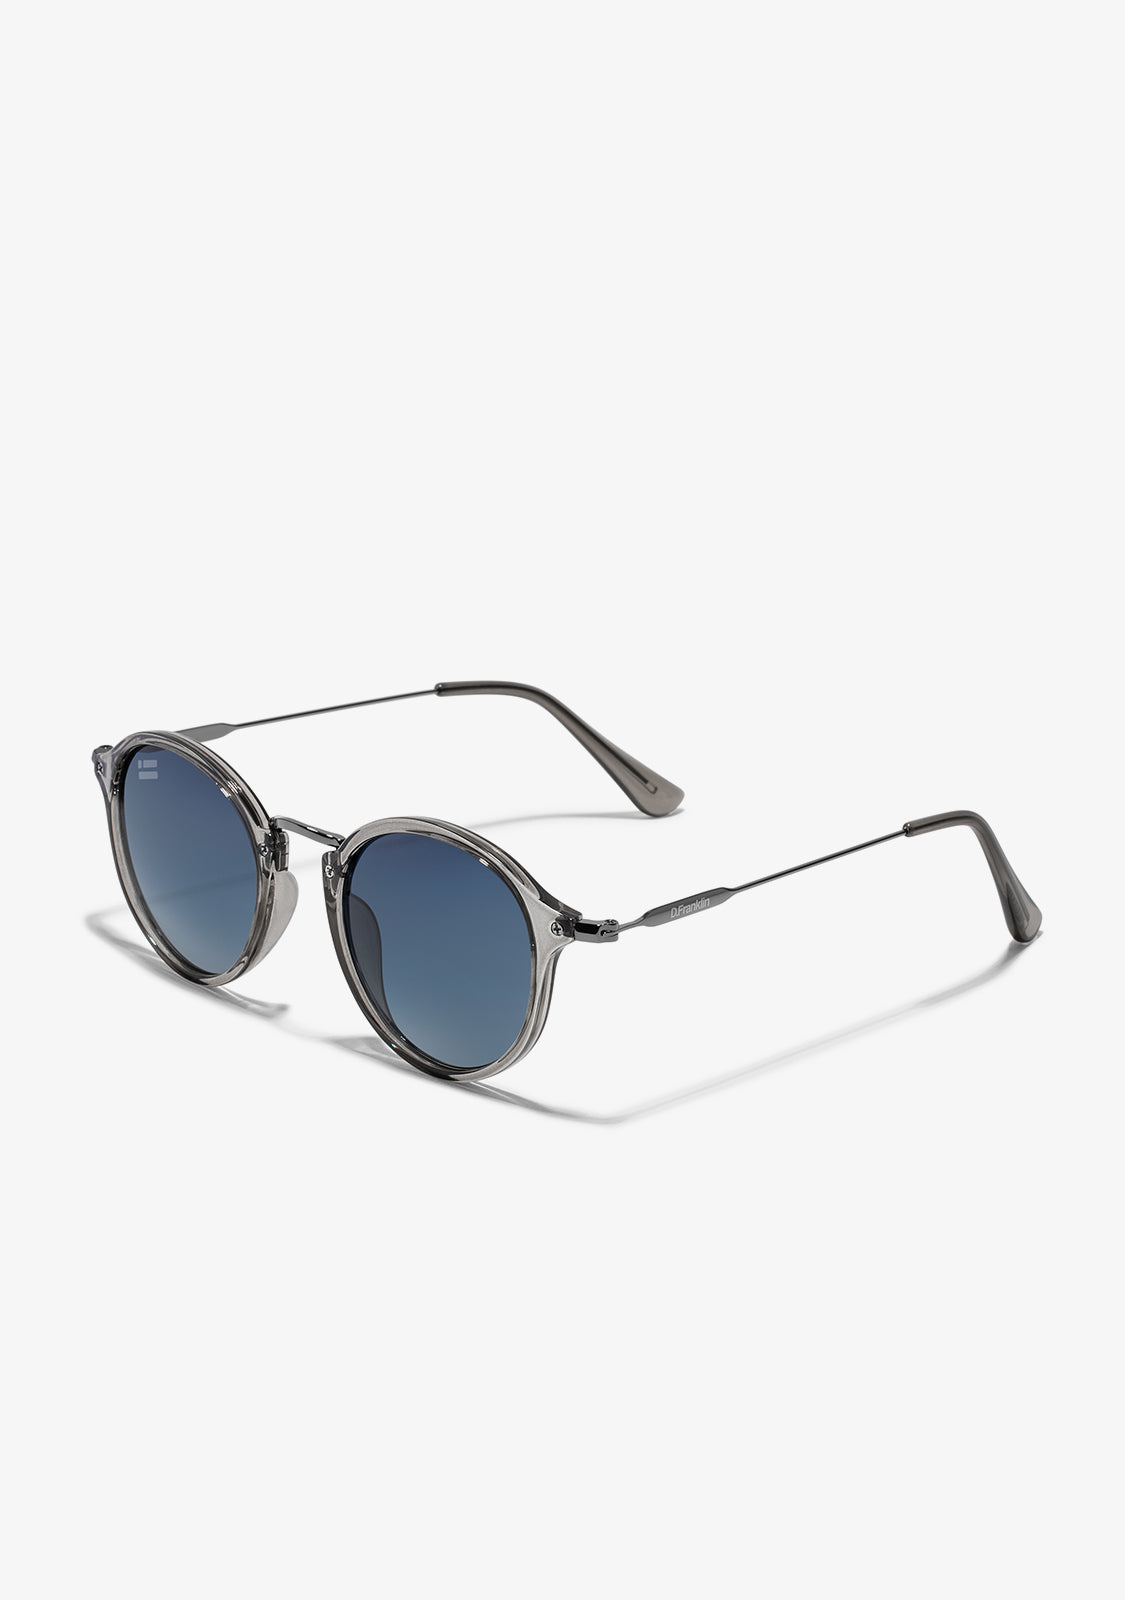 I was wondering if some one knew if the D.Franklin sunglasses are real or  not, Ive just seen a lot of mixed reviews about how it takes to long to  deliver in